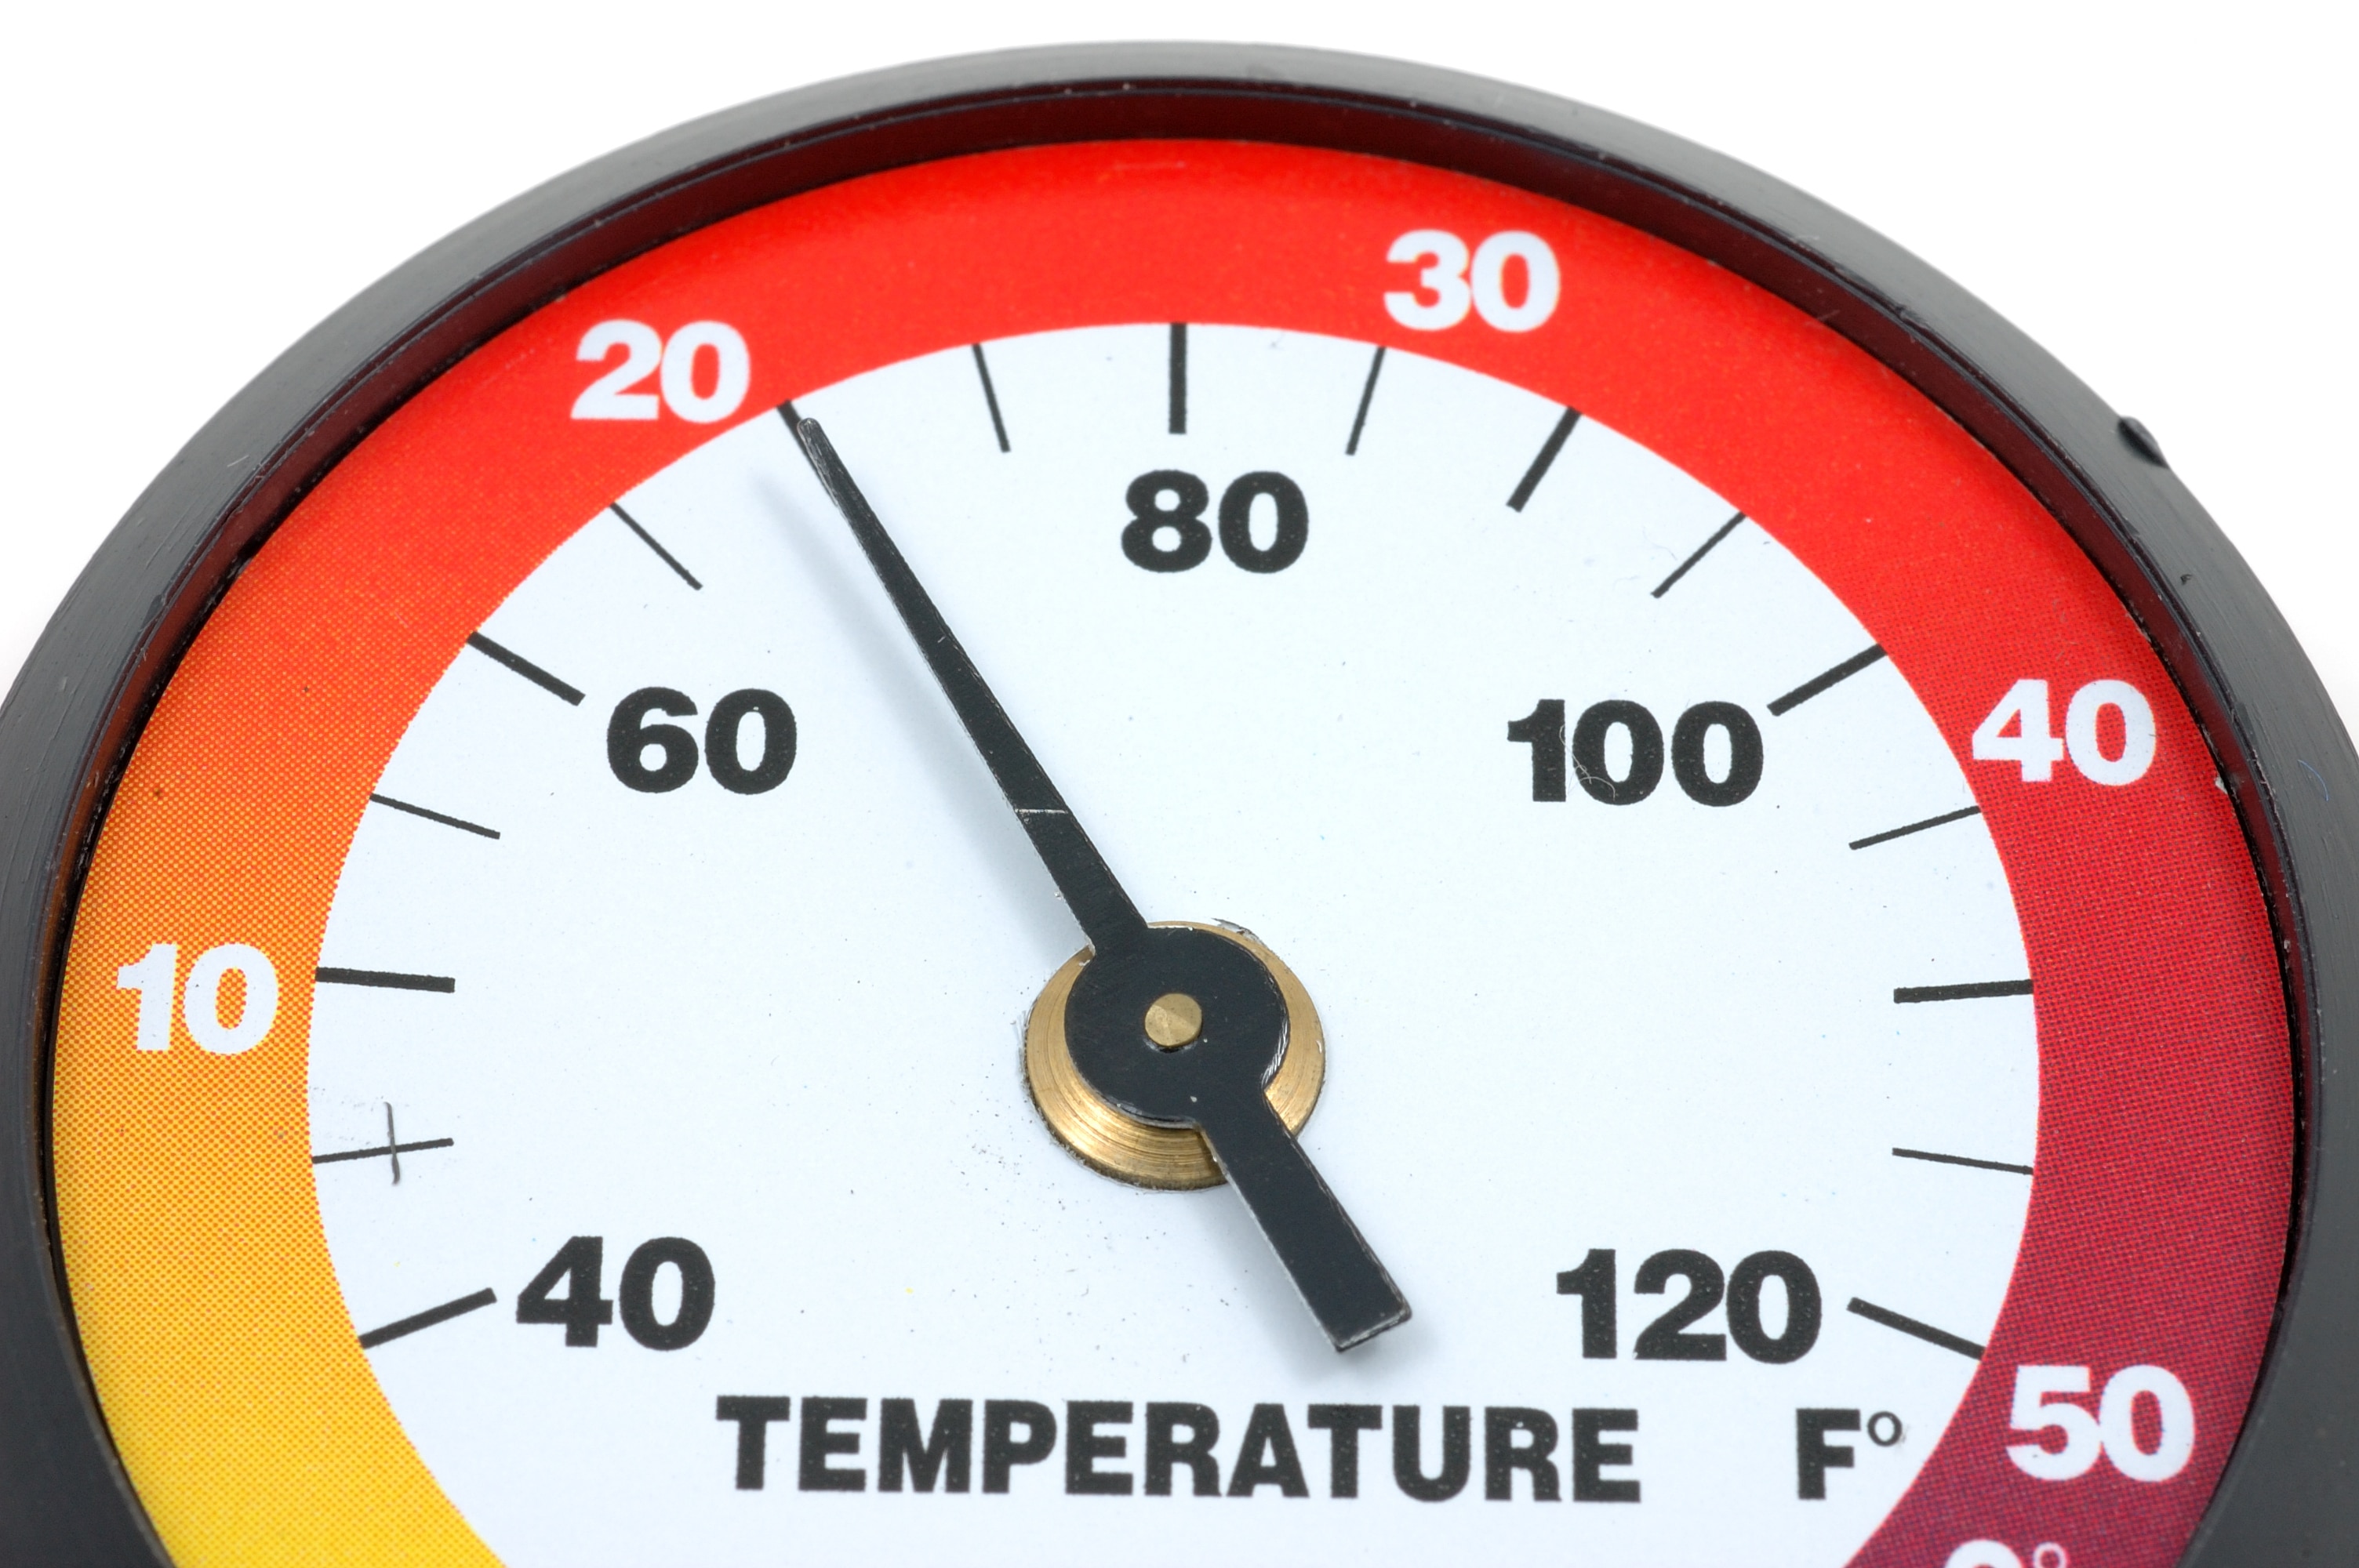 Ask a Water Heater Expert: What’s the Ideal Water Temperature?